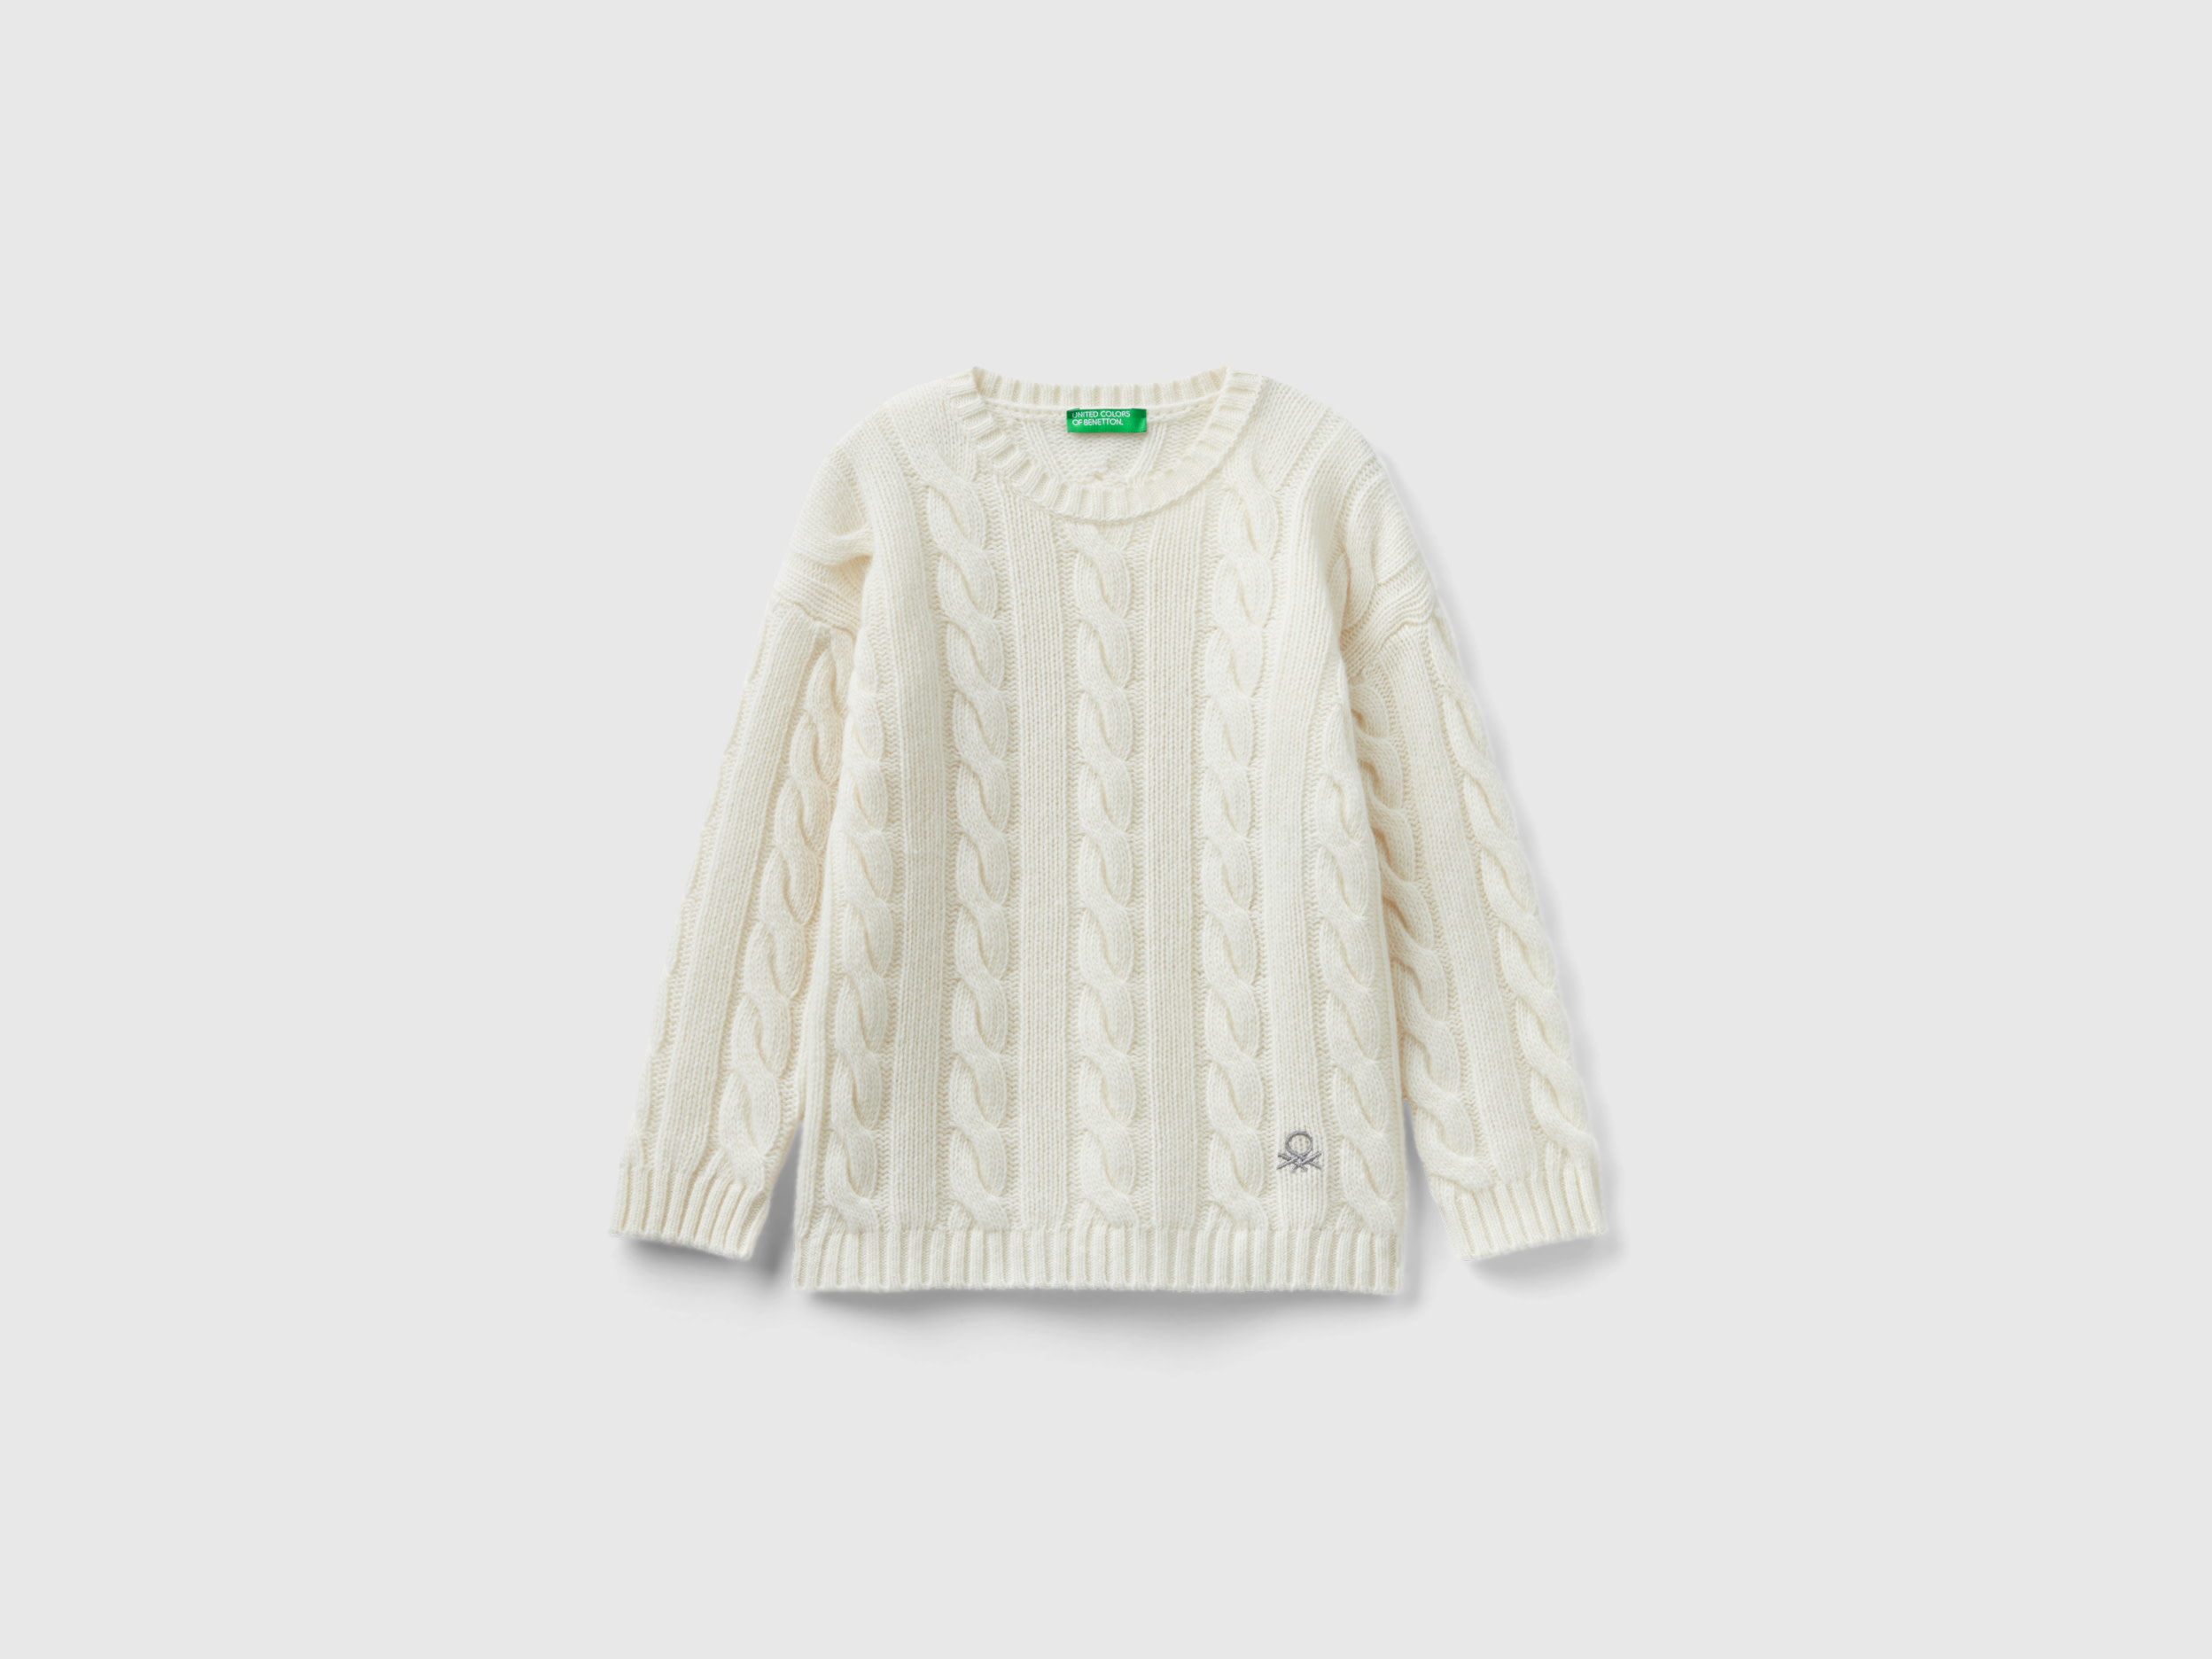 Benetton, Cable Knit Sweater In Wool Blend, size 4-5, White, Kids